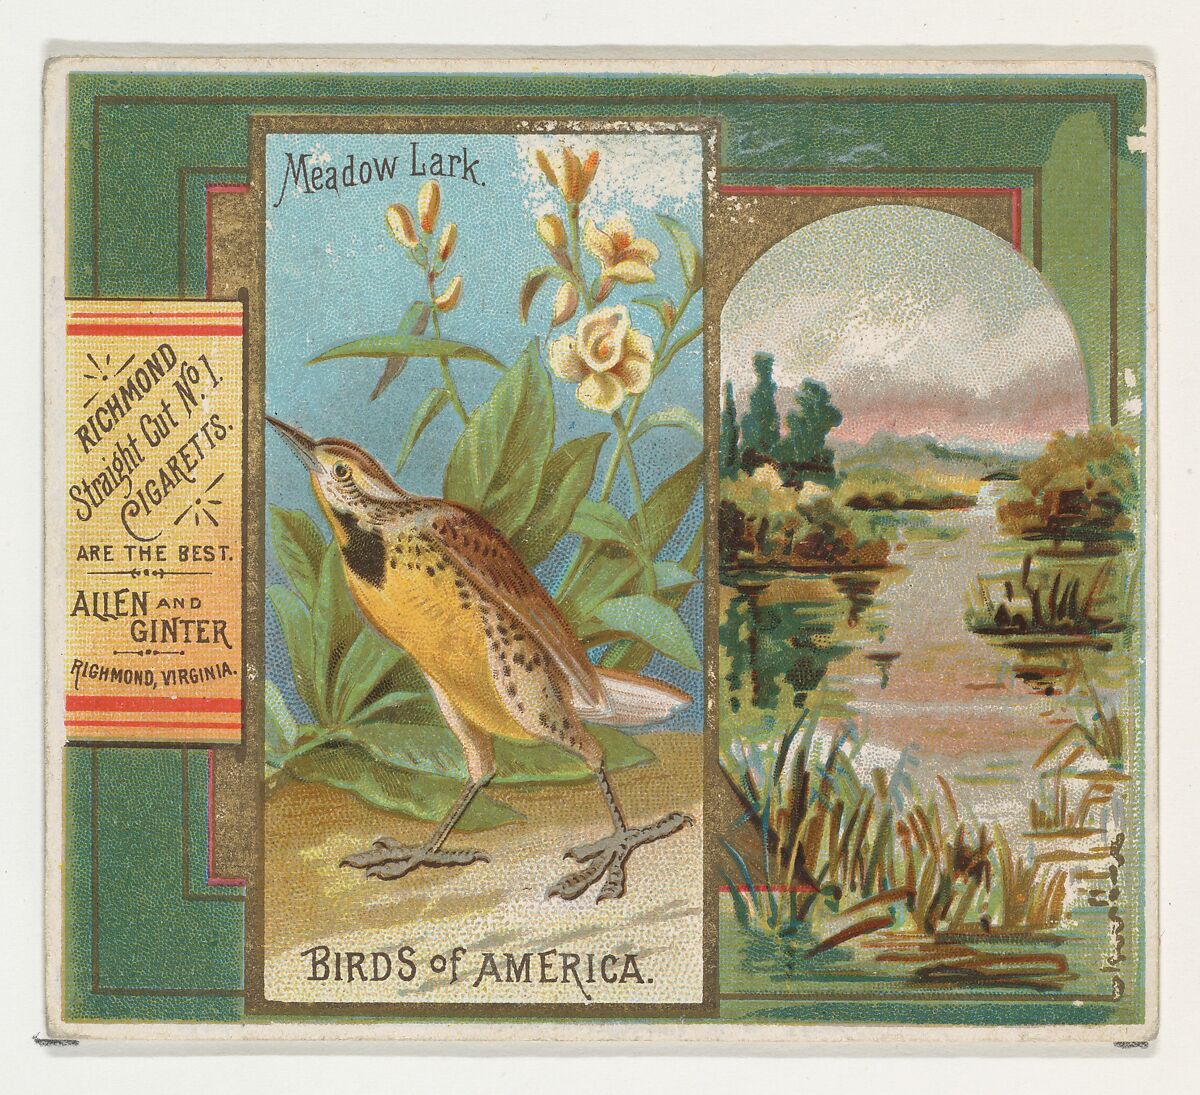 Meadow Lark, from the Birds of America series (N37) for Allen & Ginter Cigarettes, Issued by Allen &amp; Ginter (American, Richmond, Virginia), Commercial color lithograph 